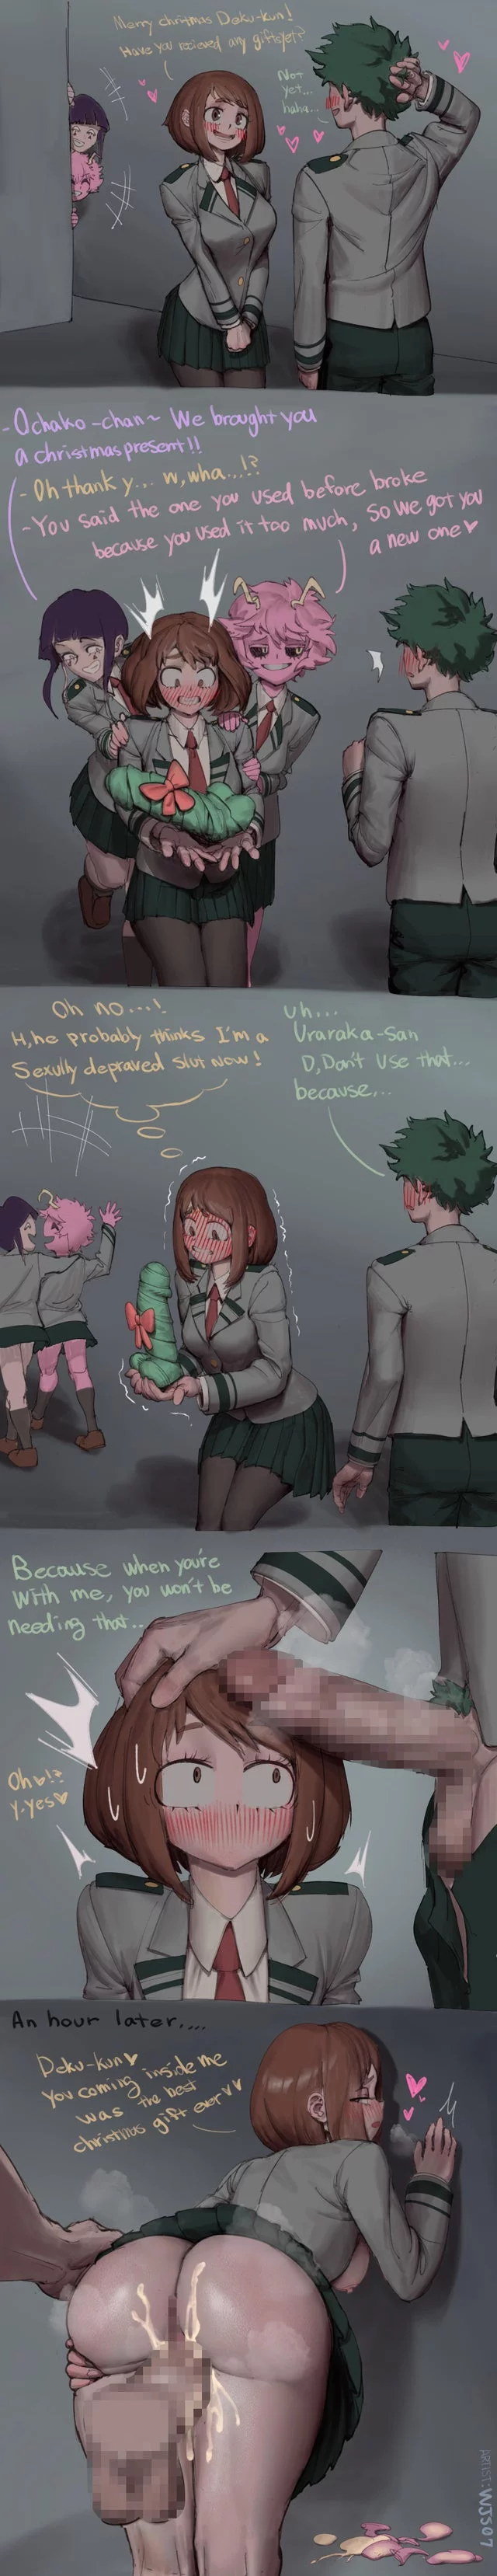 Christmas prank gone RIGHT, gone sexual (wjs07) [My Hero Academia]